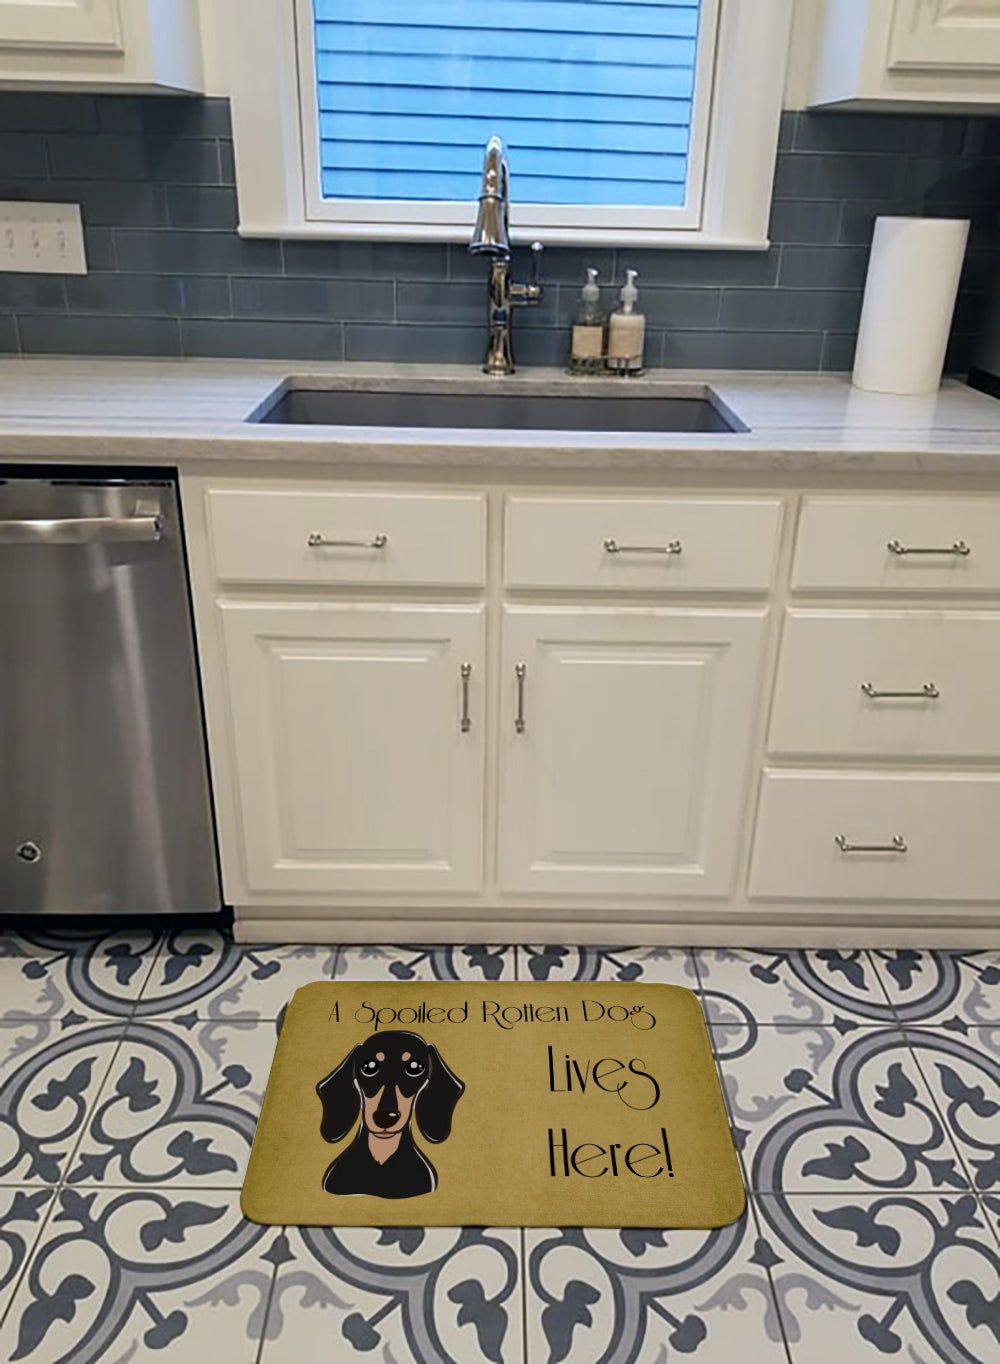 Smooth Black and Tan Dachshund Spoiled Dog Lives Here Machine Washable Memory Foam Mat BB1463RUG - the-store.com